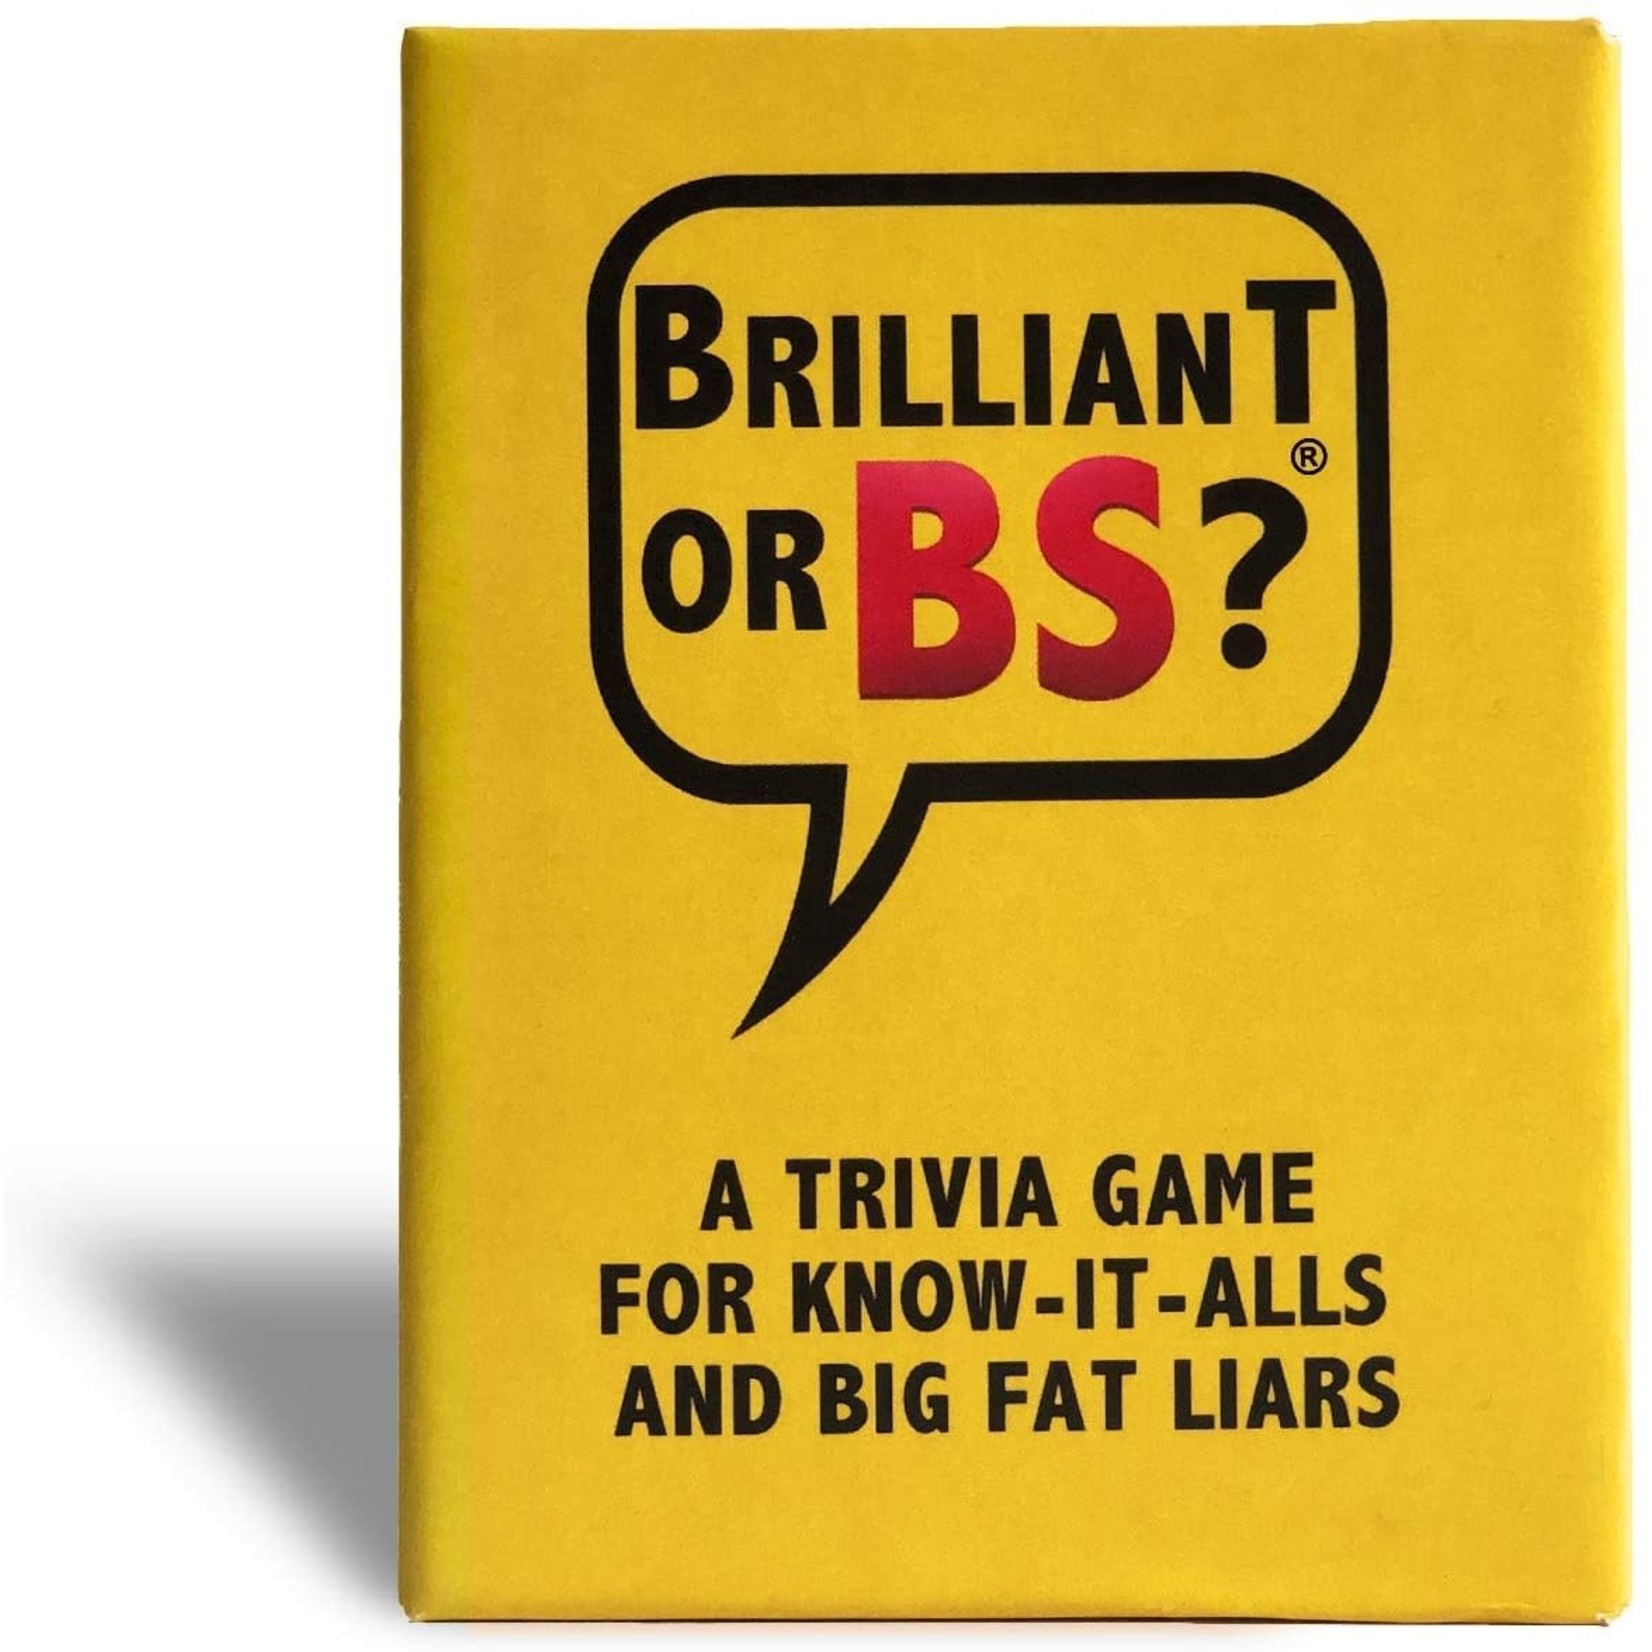 Brilliant or BS? Brilliant or BS? A Trivia Game for Know-It-Alls and Big Fat Liars